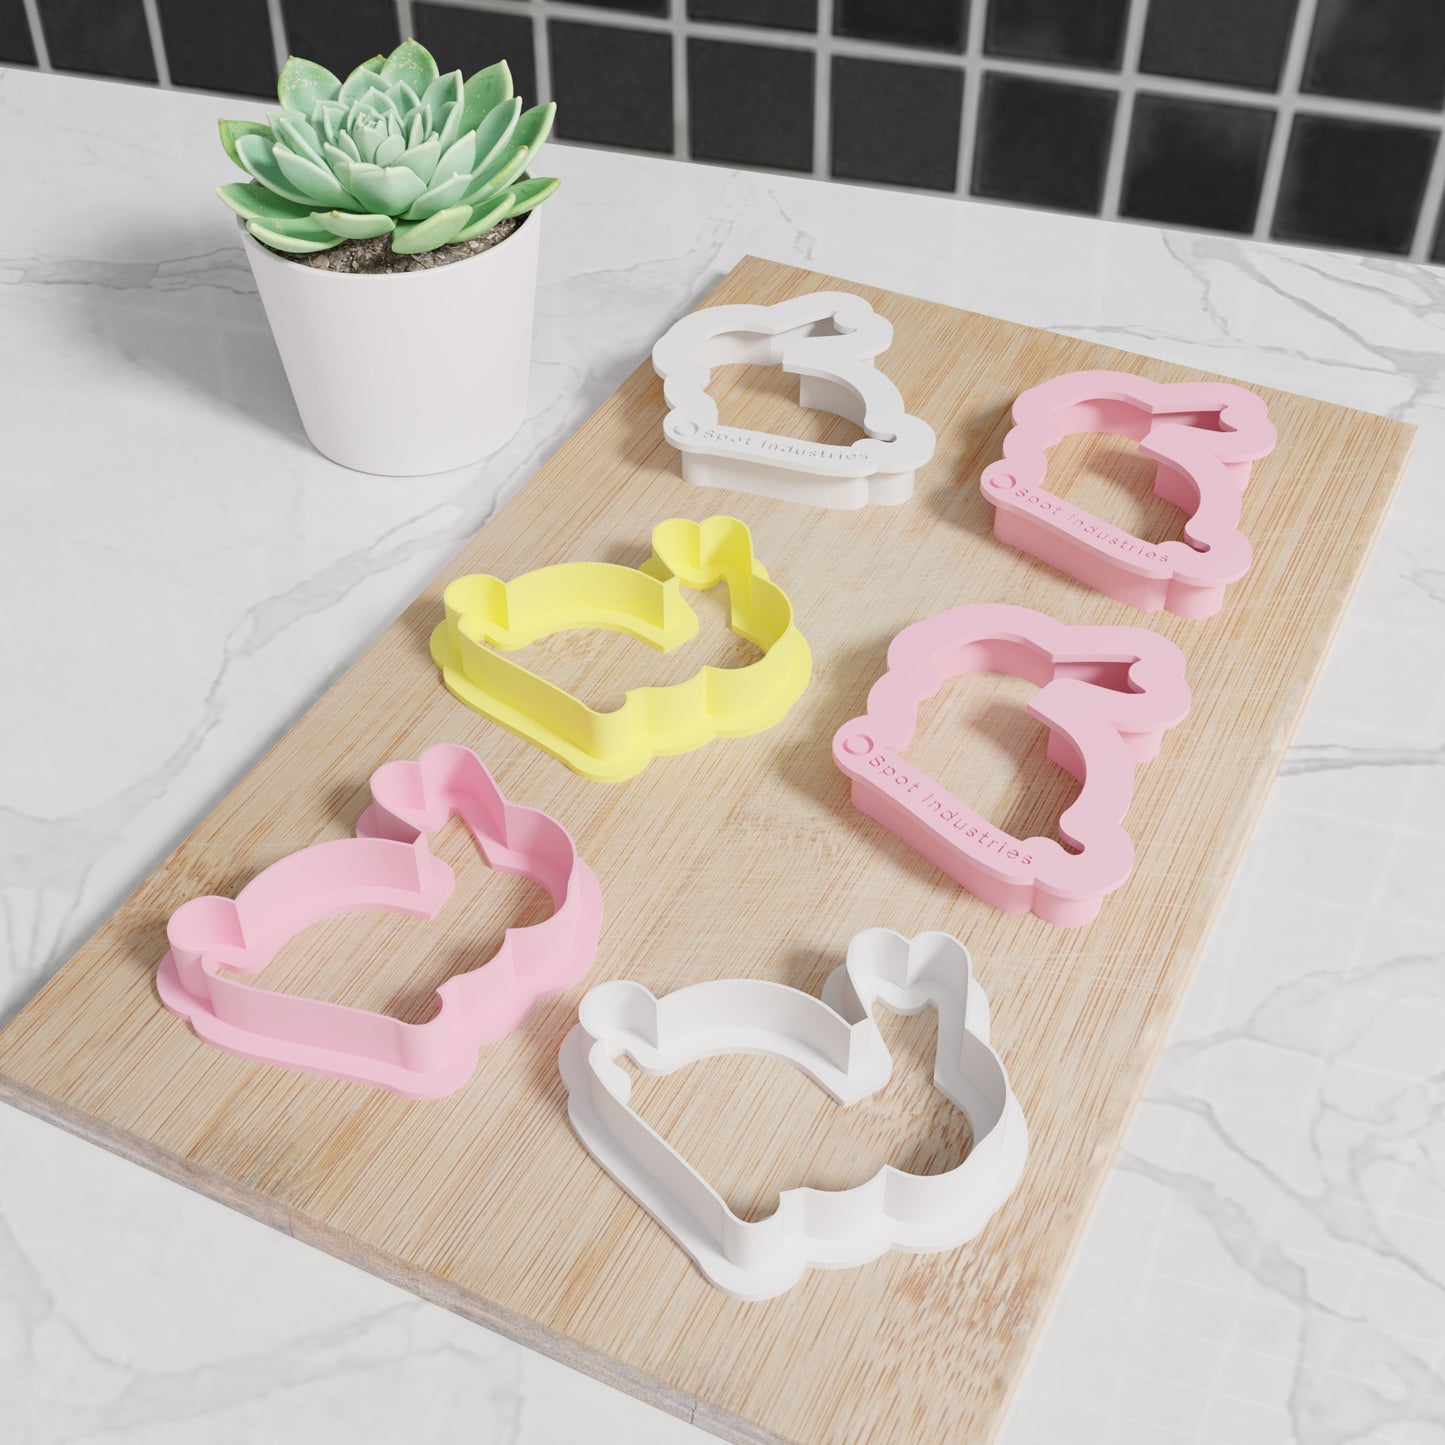 Easter Bunny Cookie Cutter Set. Matches Others In Our Easter Collection. Classic Side Profile Easter Bunny Cookie Cutter